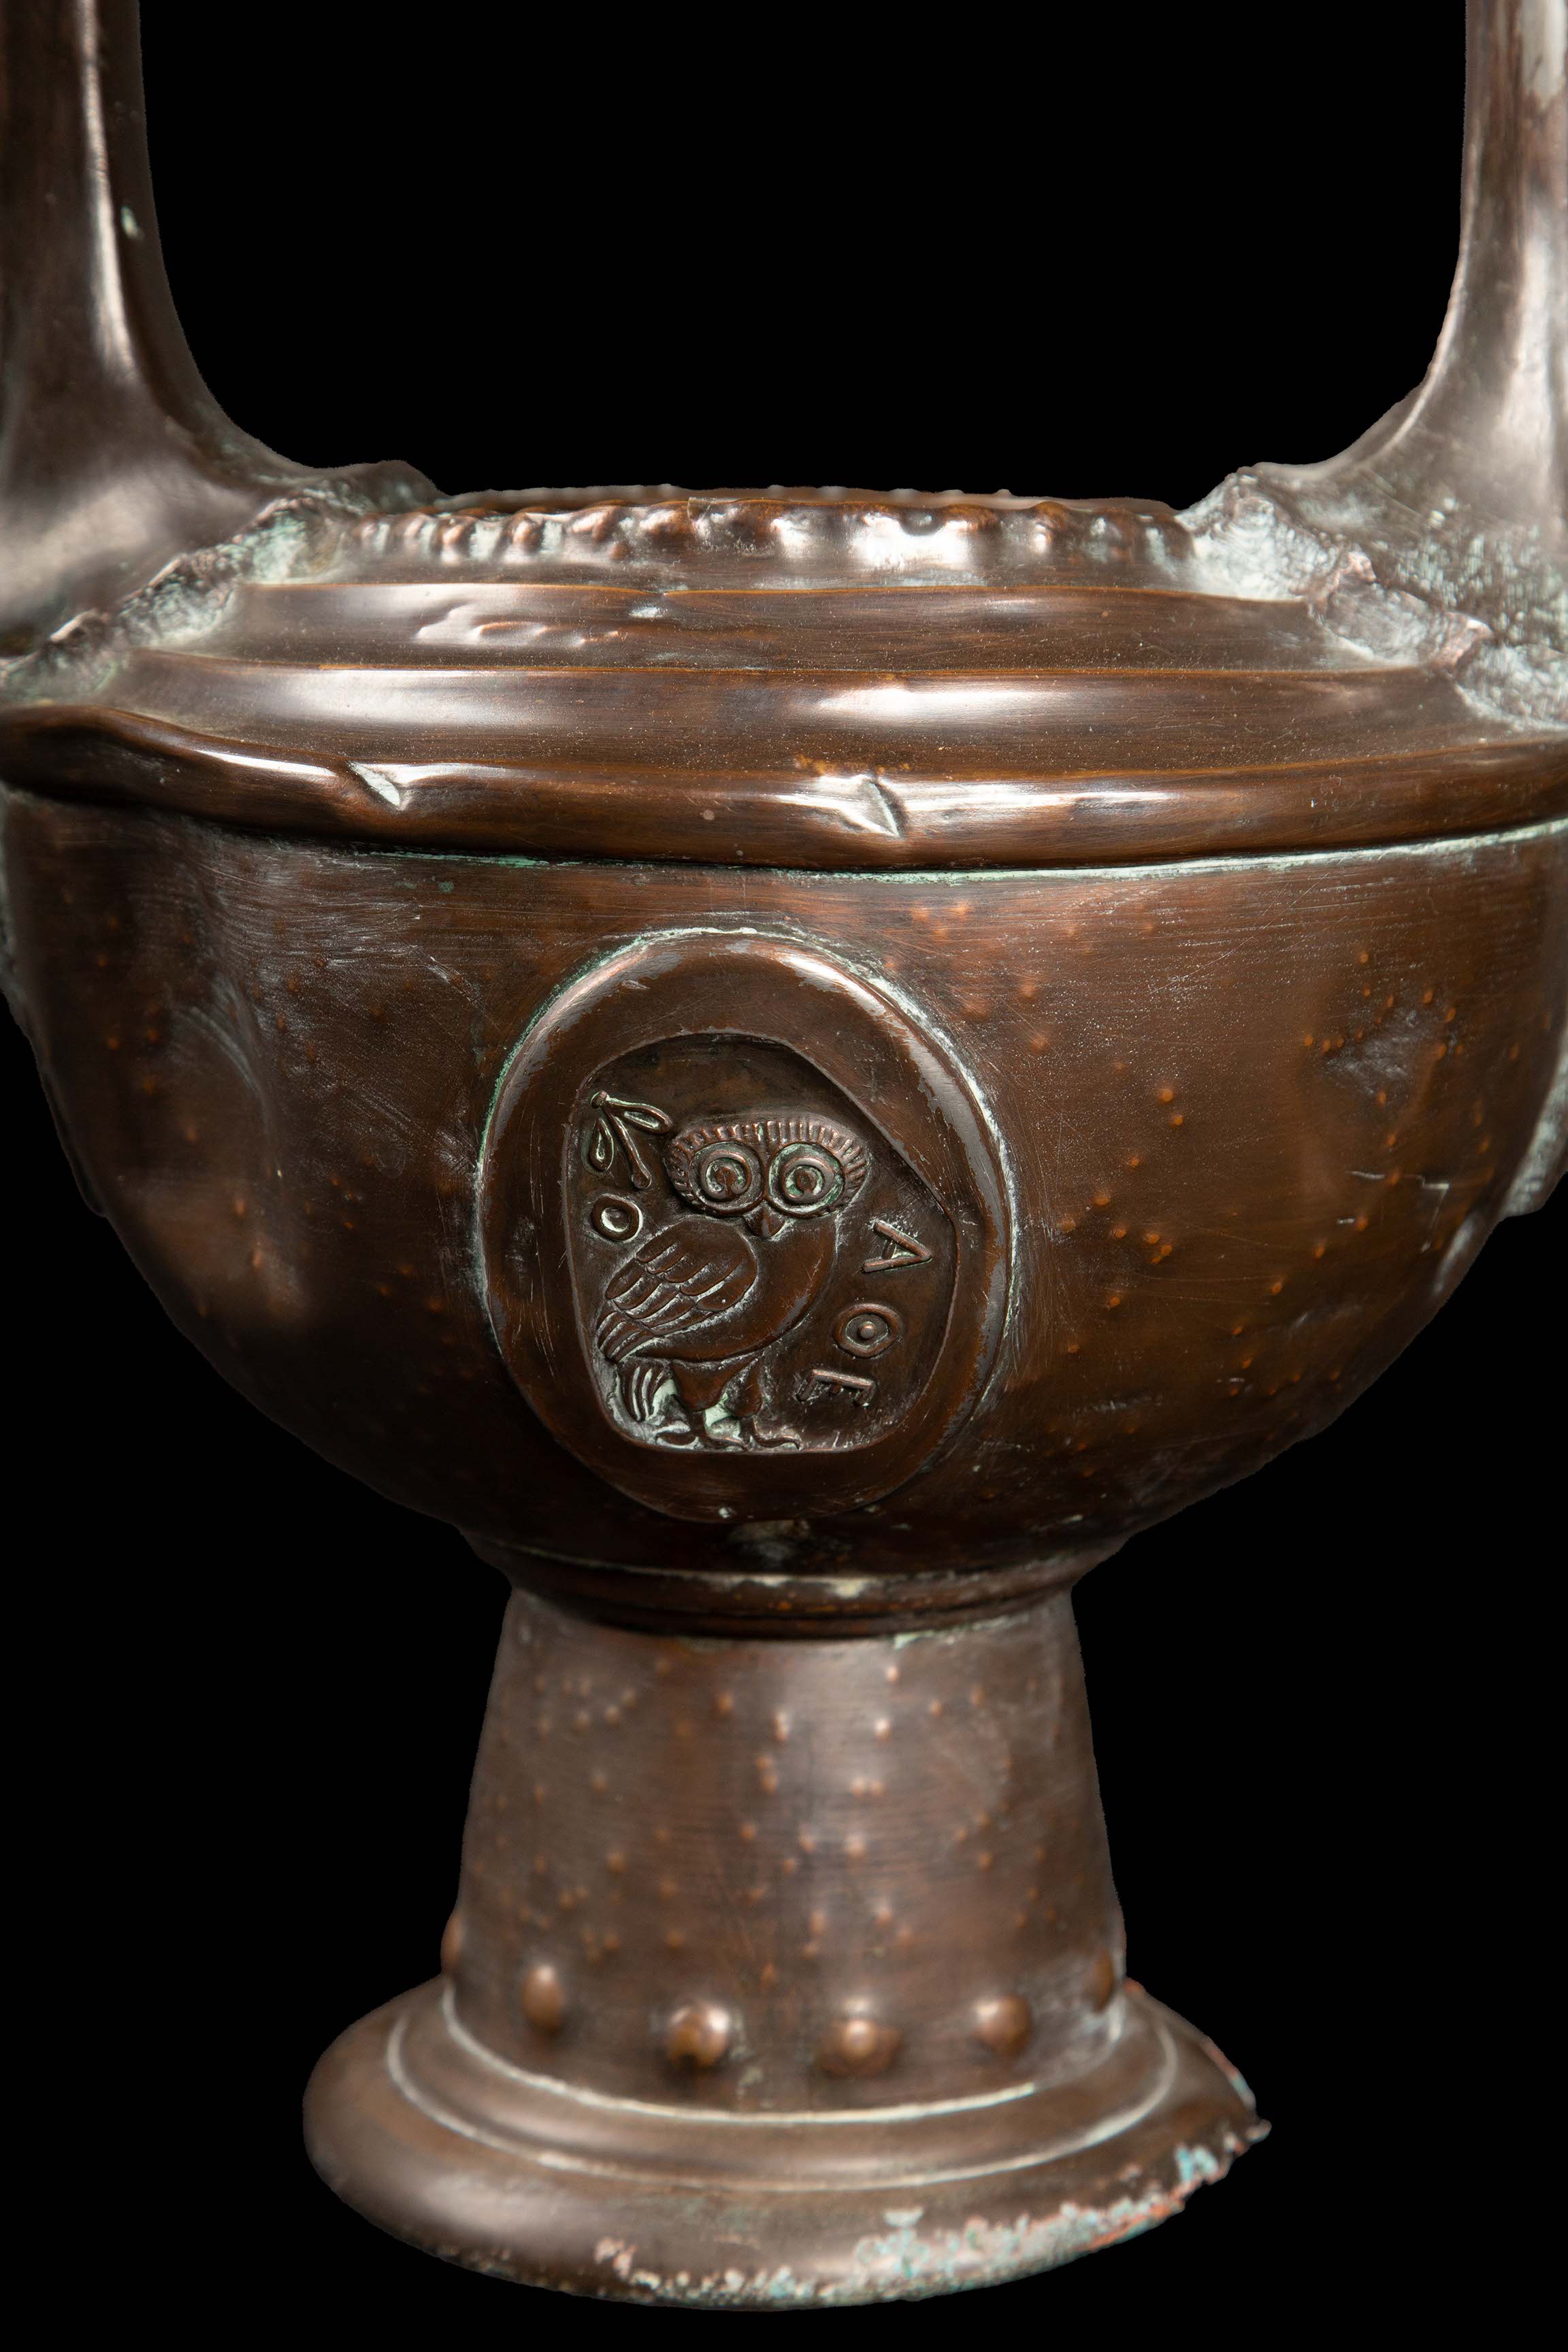 Timeless Wisdom: 19th Century Greek Owl Urns with Crowned Horse Heads